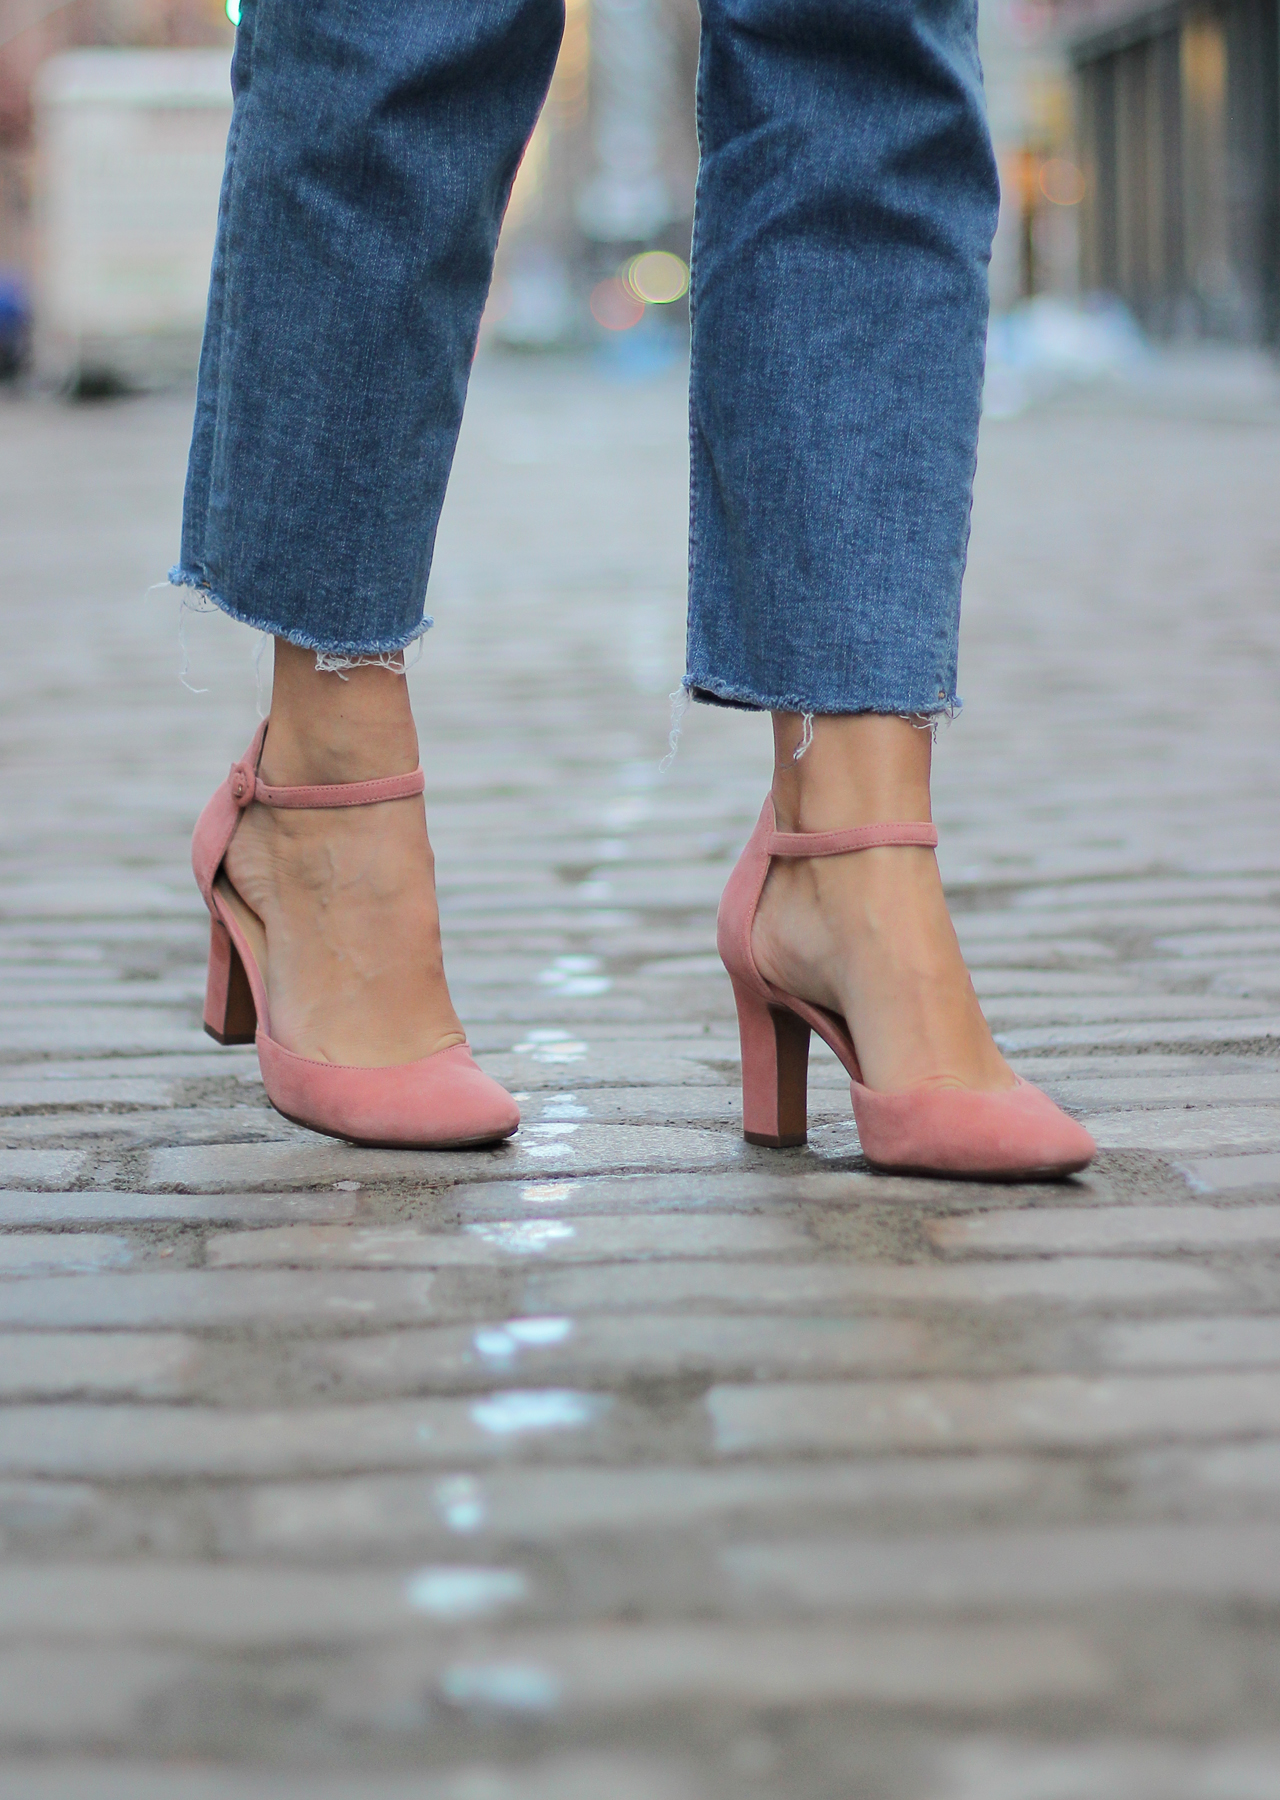 The Steele Maiden: Naturalizer Pink Suede Heels, Overalls and Eyelet Ruffle Blouse